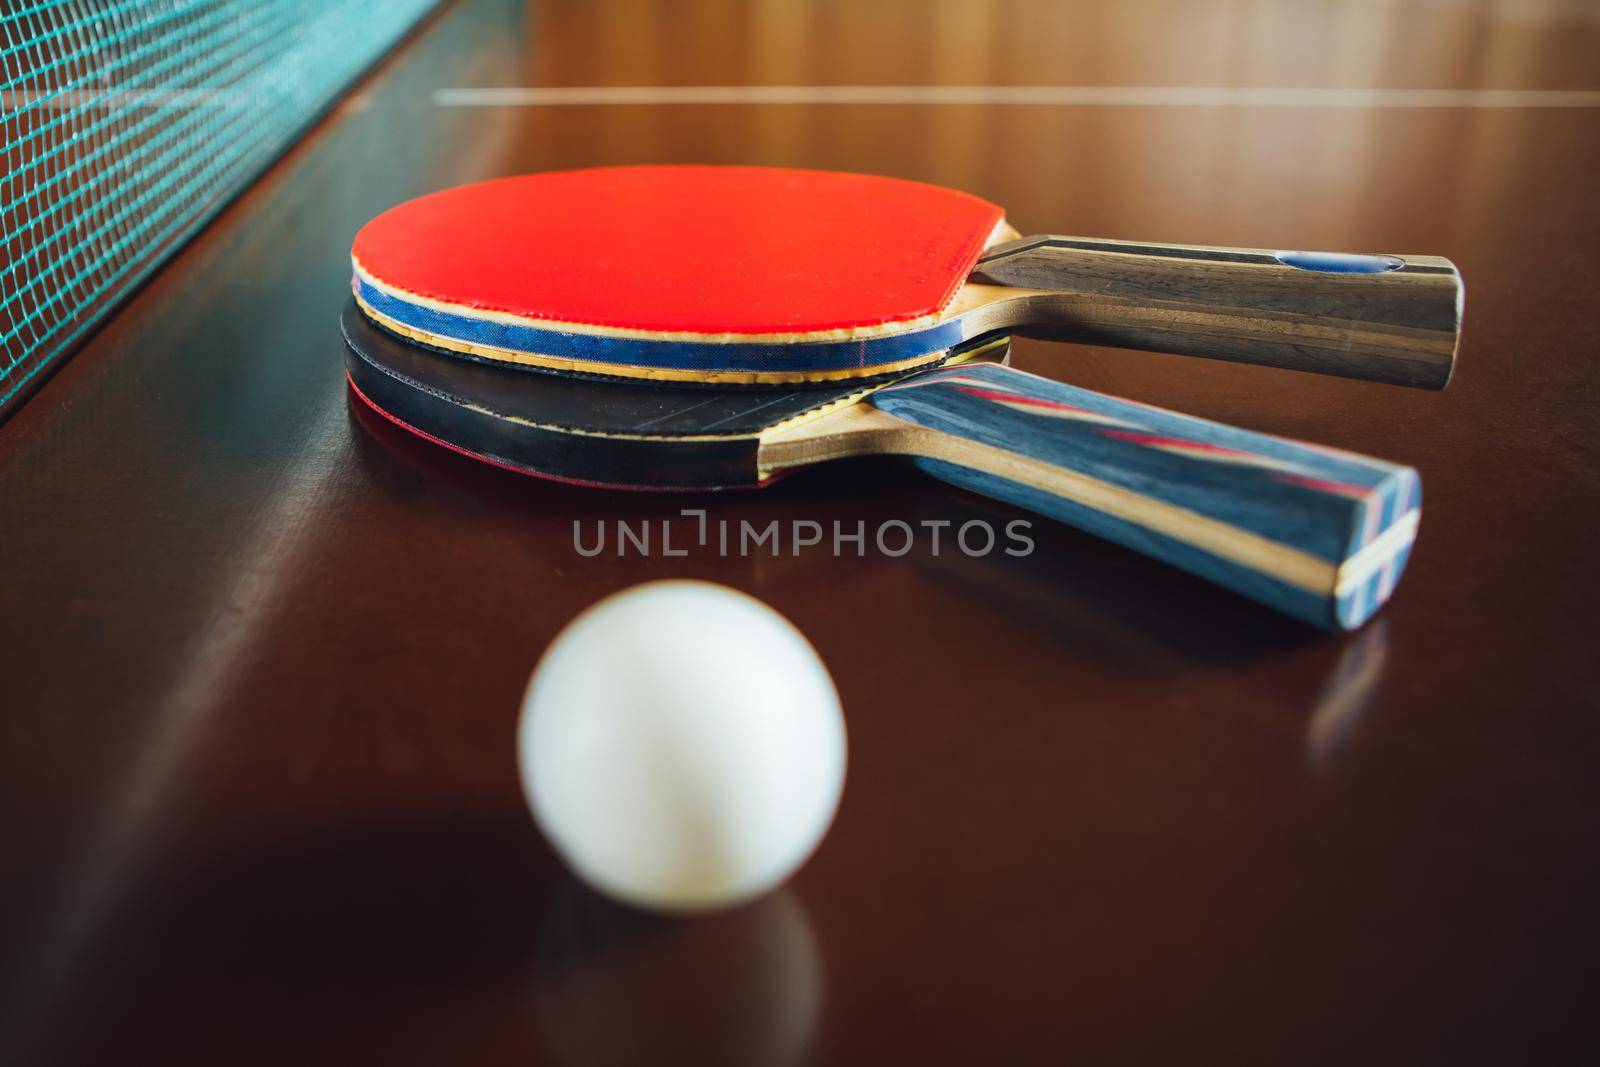 table tennis rackets and ball, close-up view